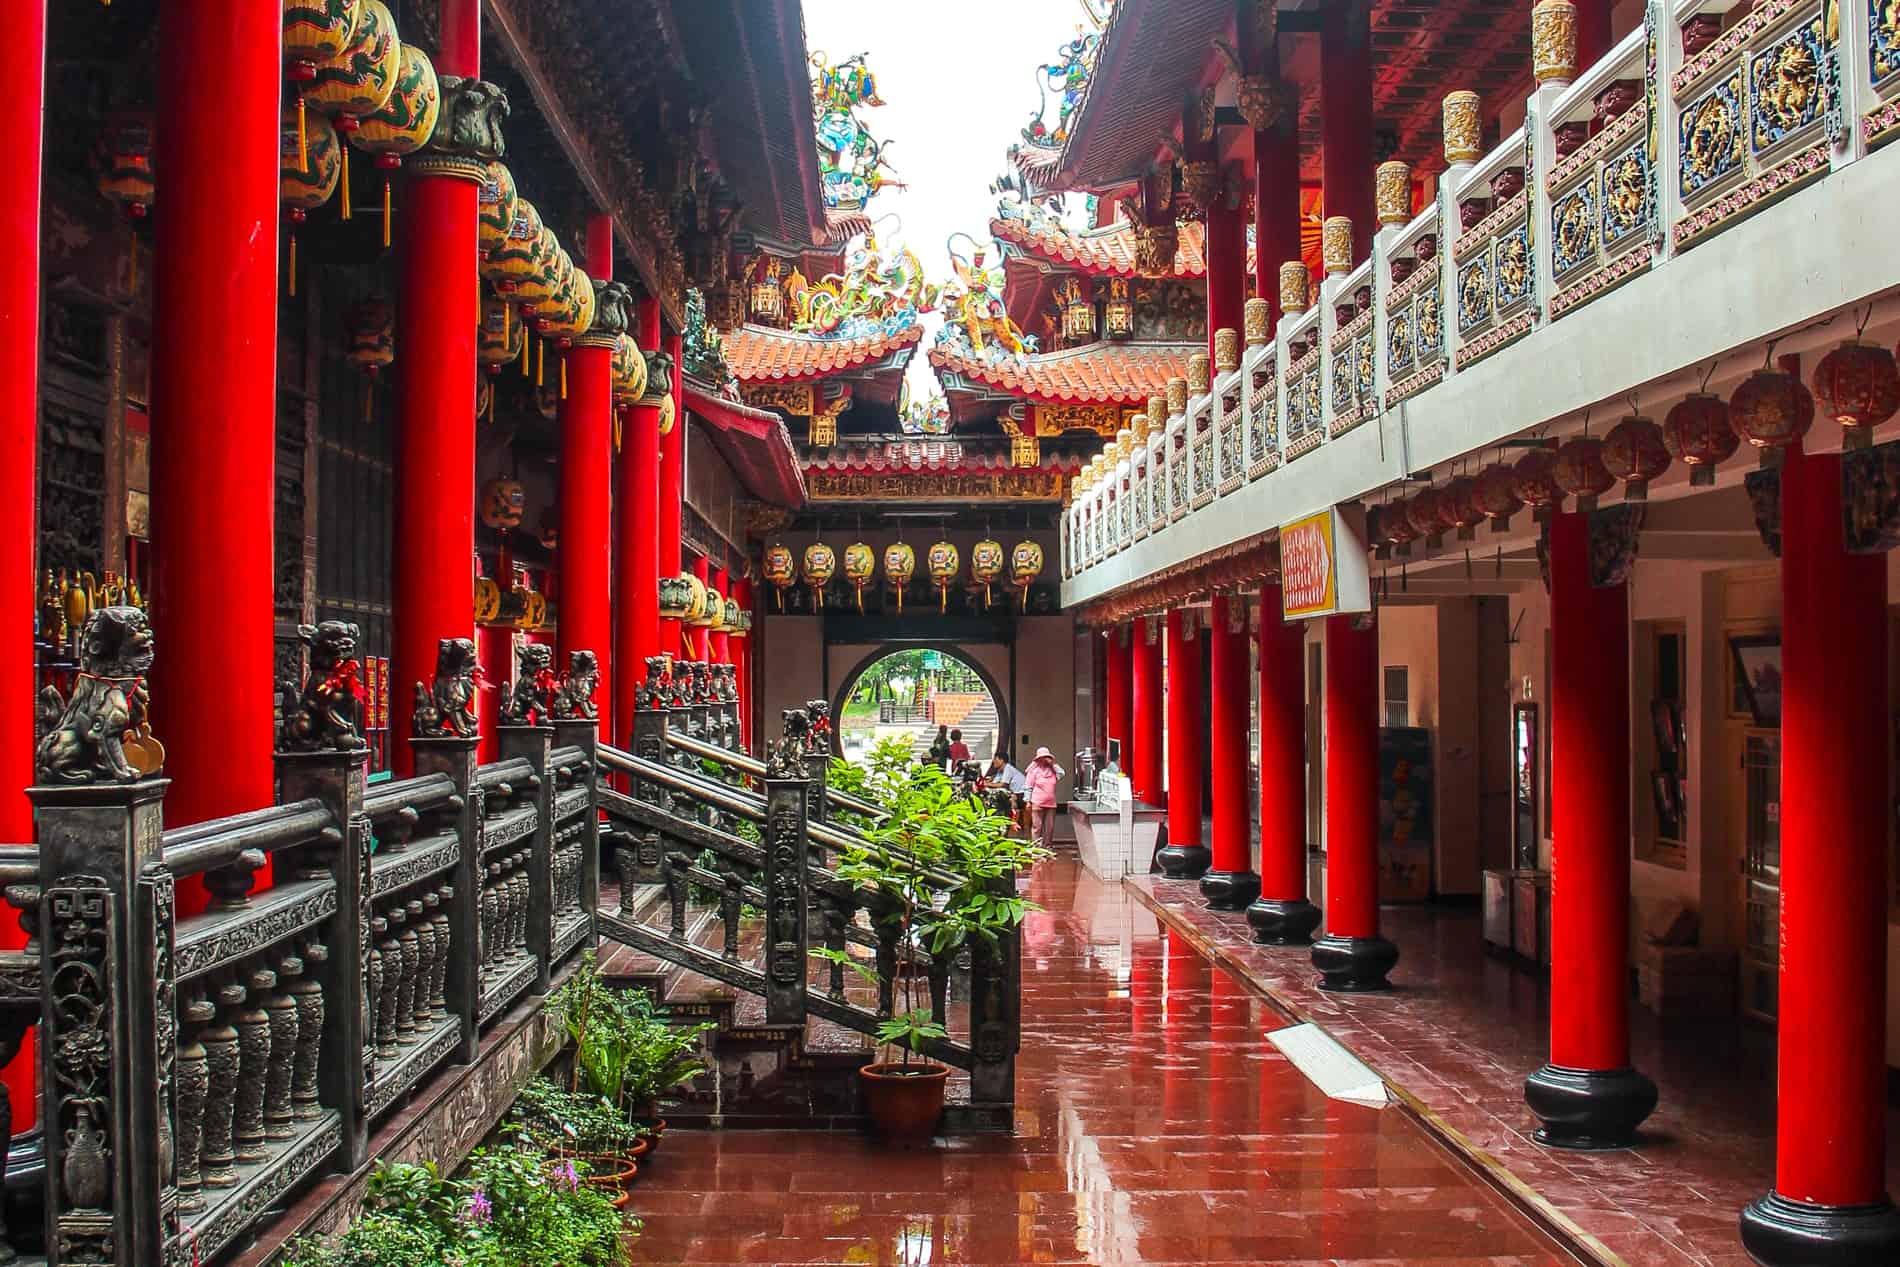 Inside the Luermen Matsu Temple in Tainan with red columns, carved stairs cases and balconies and yellow lanterns. 